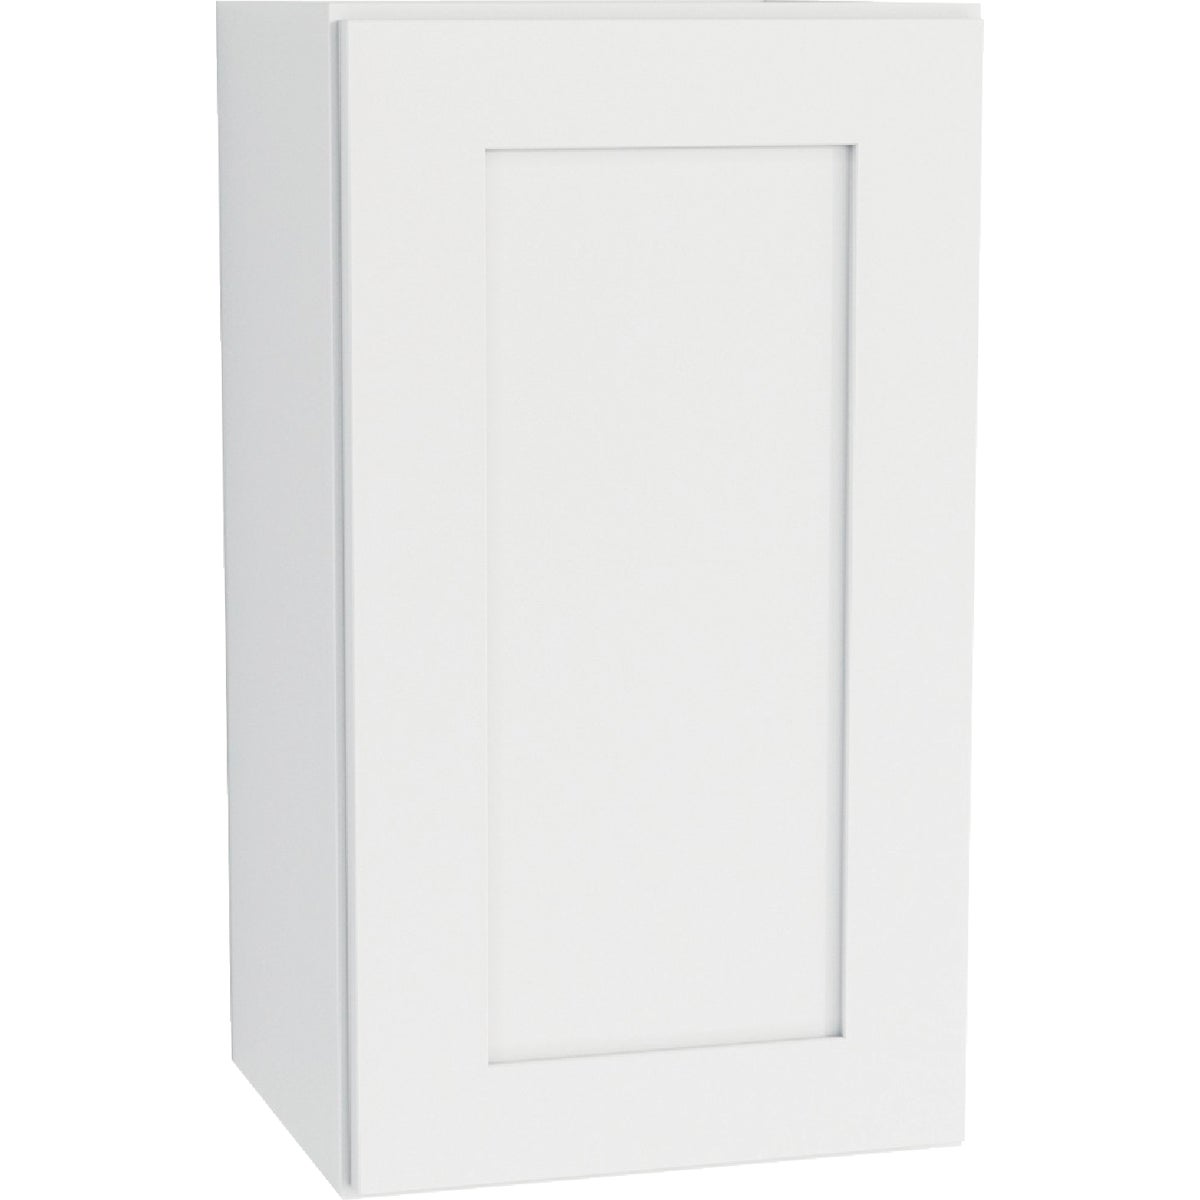 CraftMark Plymouth Shaker 18 In. W x 12 In. D x 30 In. H Ready To Assemble White Wall Kitchen Cabinet